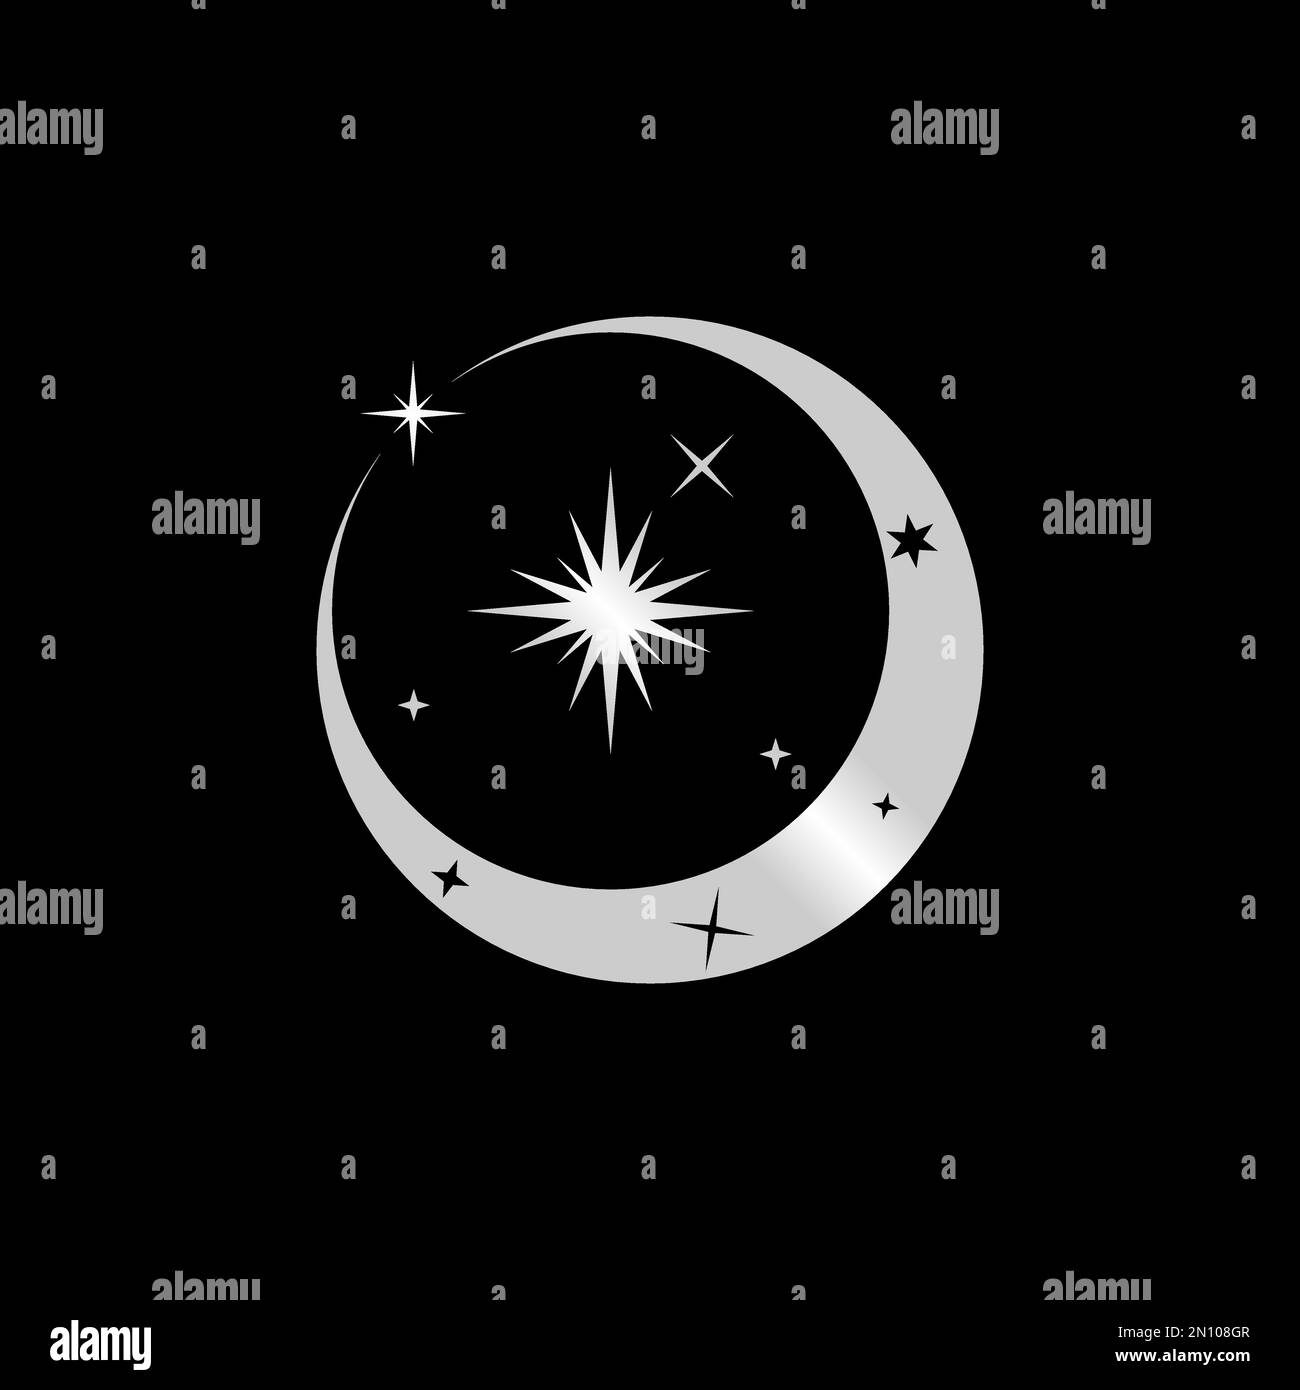 Moonlight or crescent and Stars image graphic icon logo design abstract concept vector stock. Can be used as a symbol related to metal or romance. Stock Vector